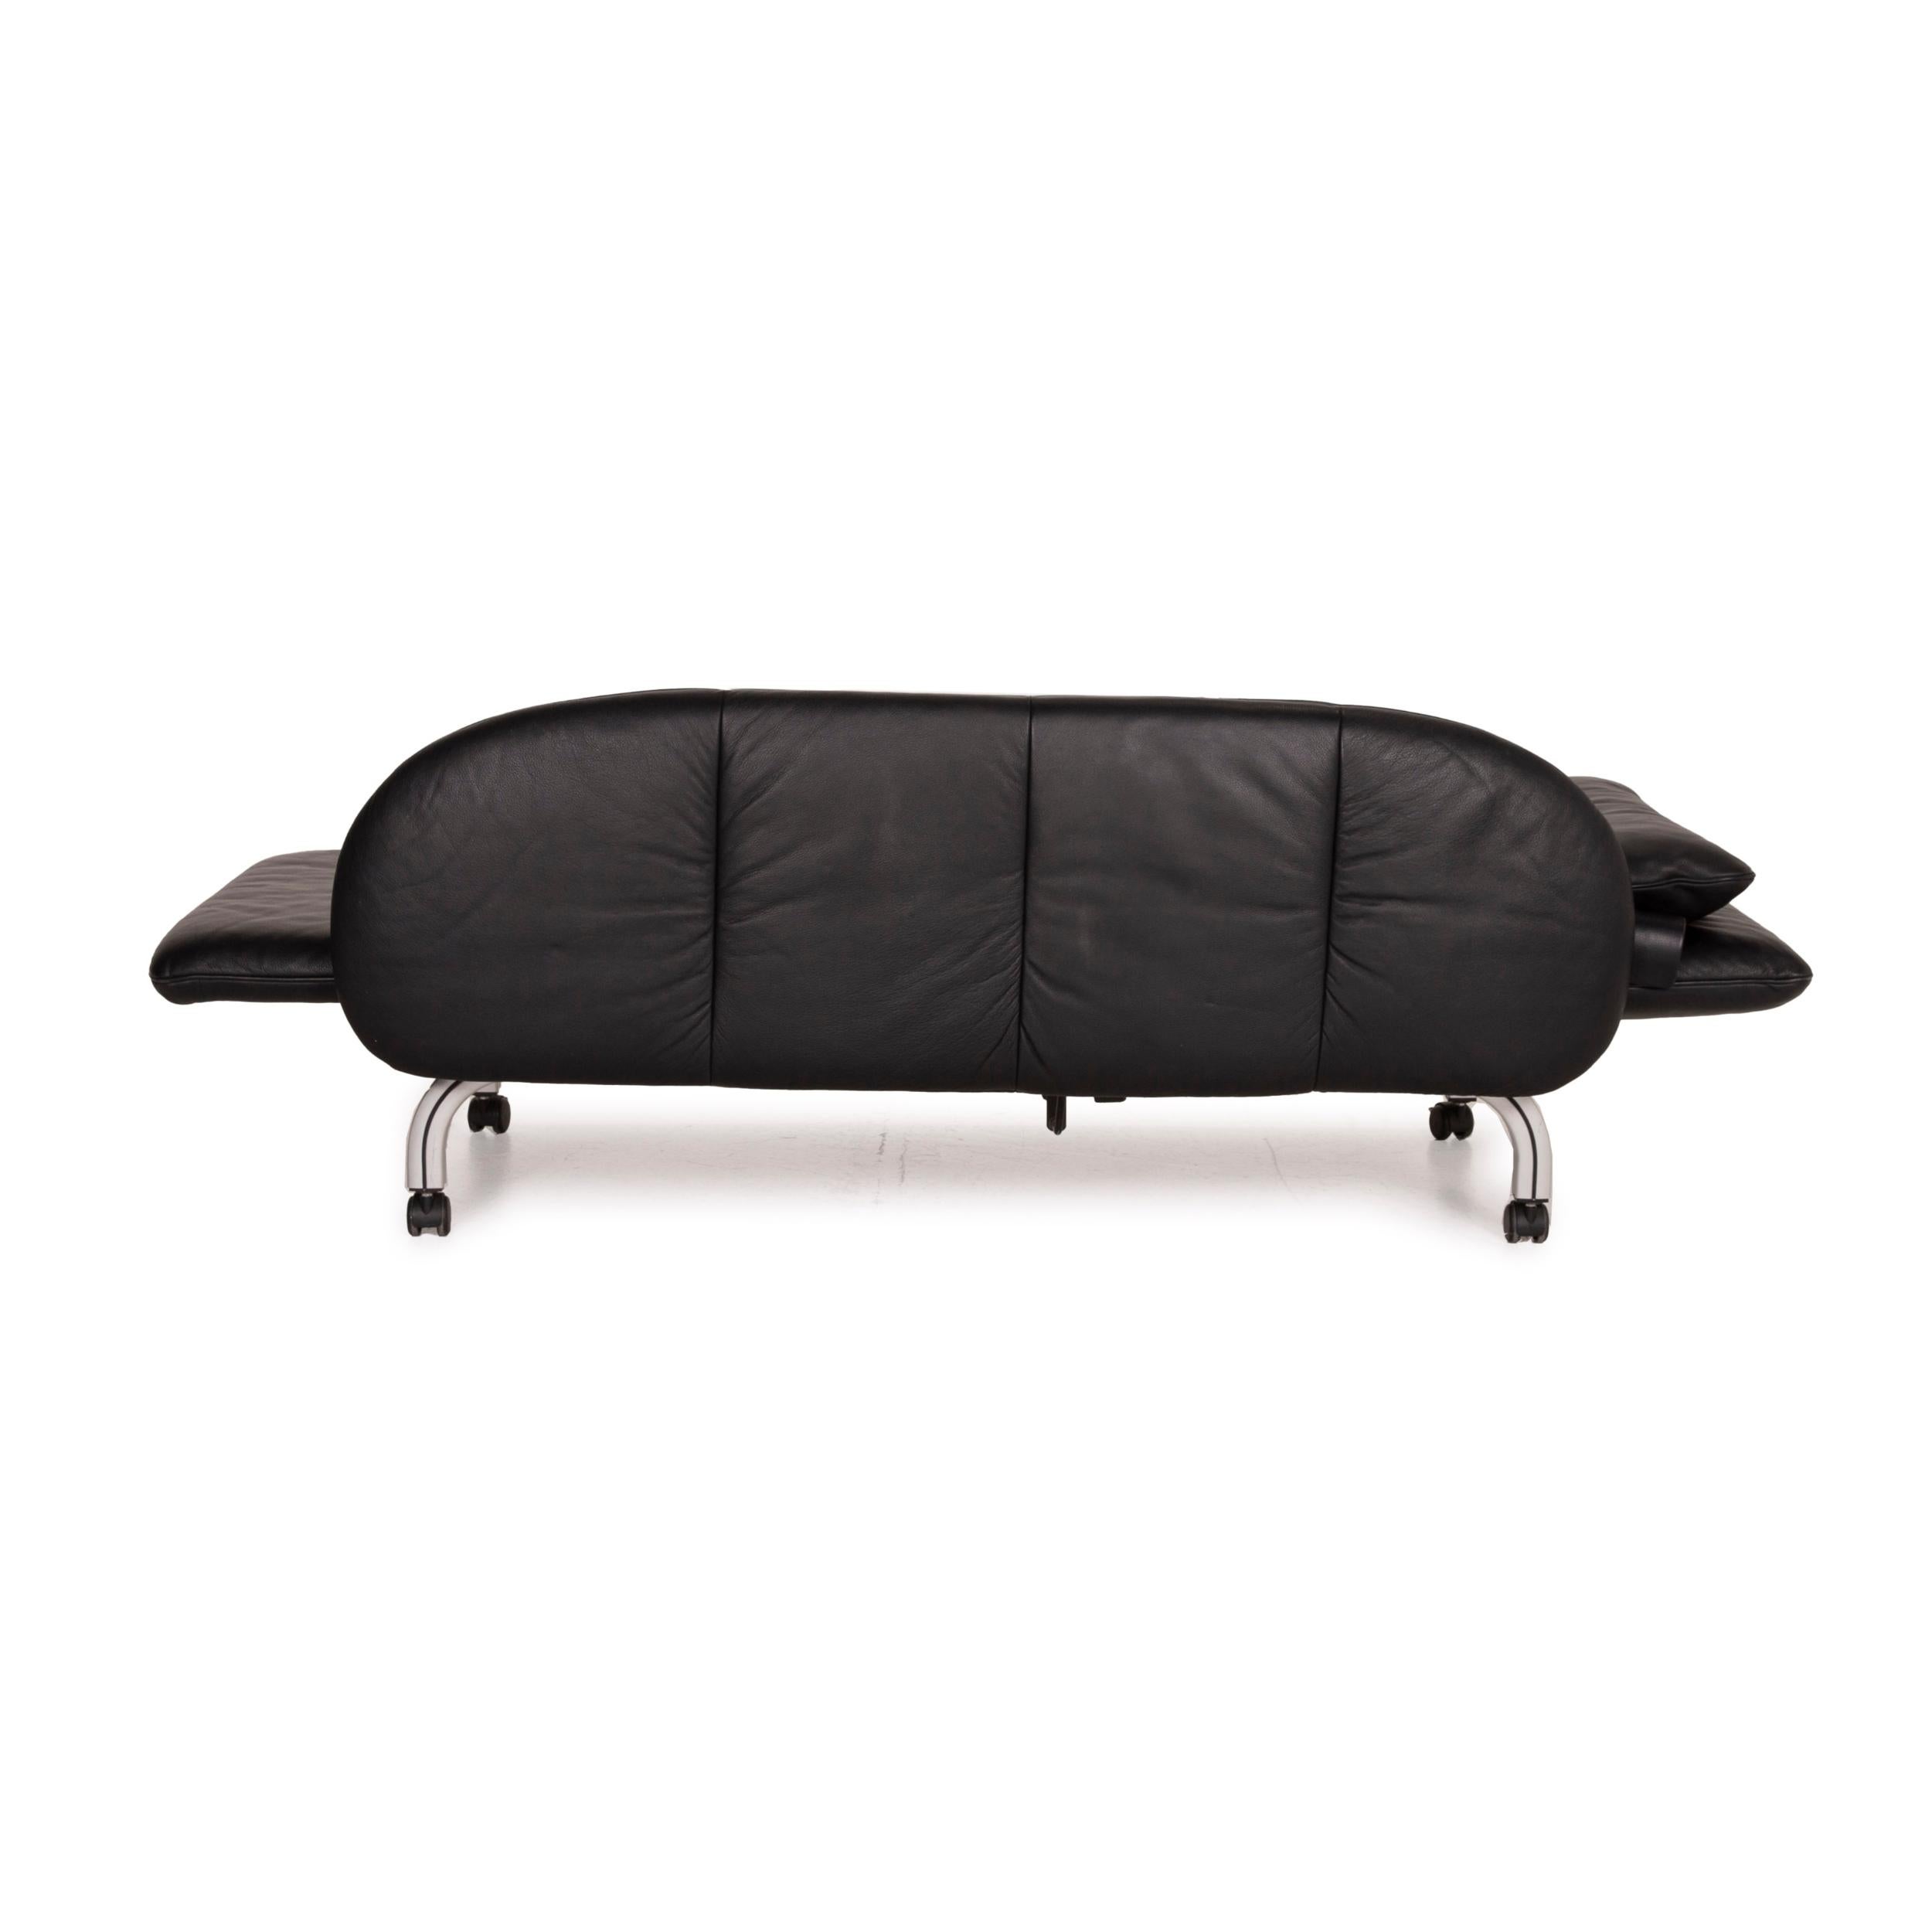 Interprofil Beo Leather Lounger Black Function Two-Seater 4